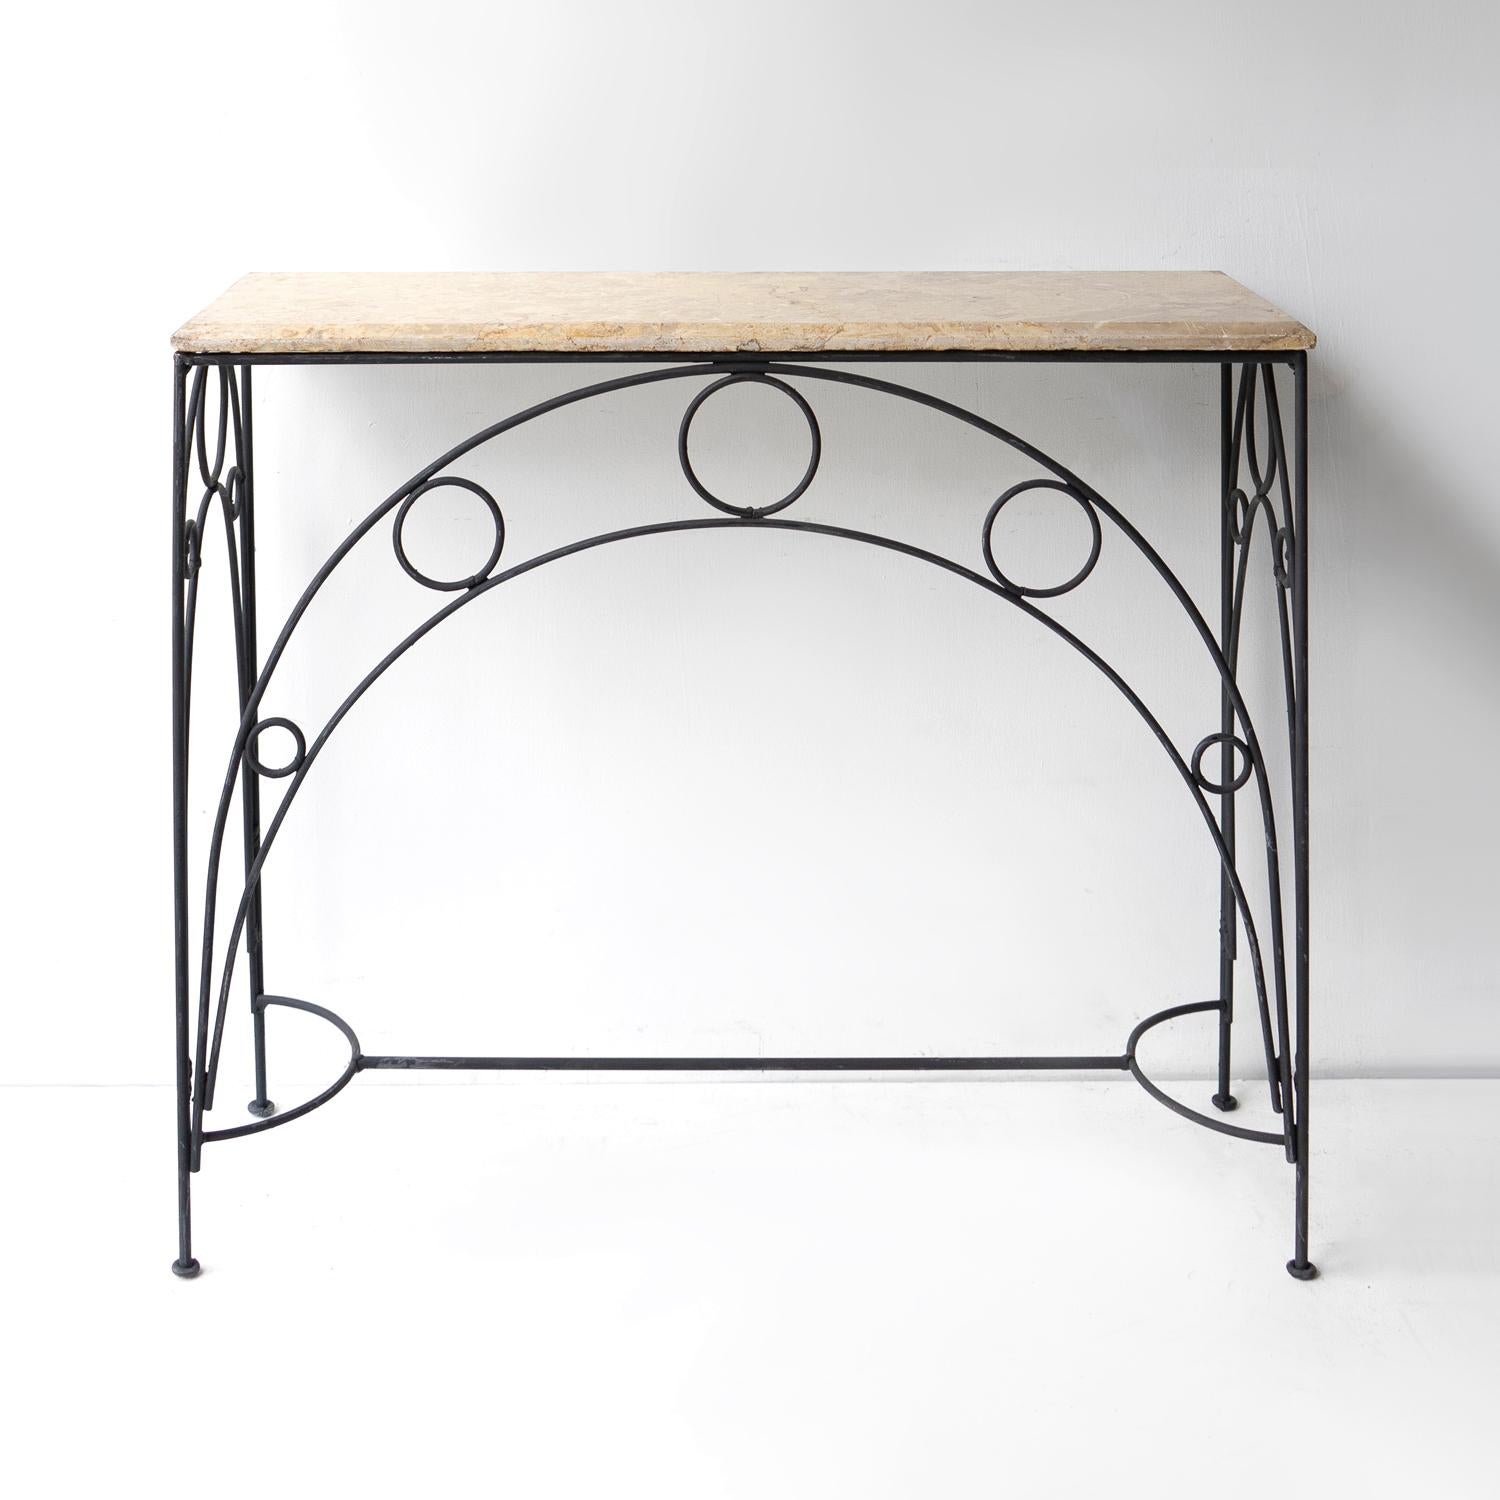 VINTAGE CONSOLE TABLE
Of elegant proportions with a natural solid marble top which has wonderful character and sits on a wrought metal base with arched and circular decoration.

Probably originated in France and dating from the Mid-20th